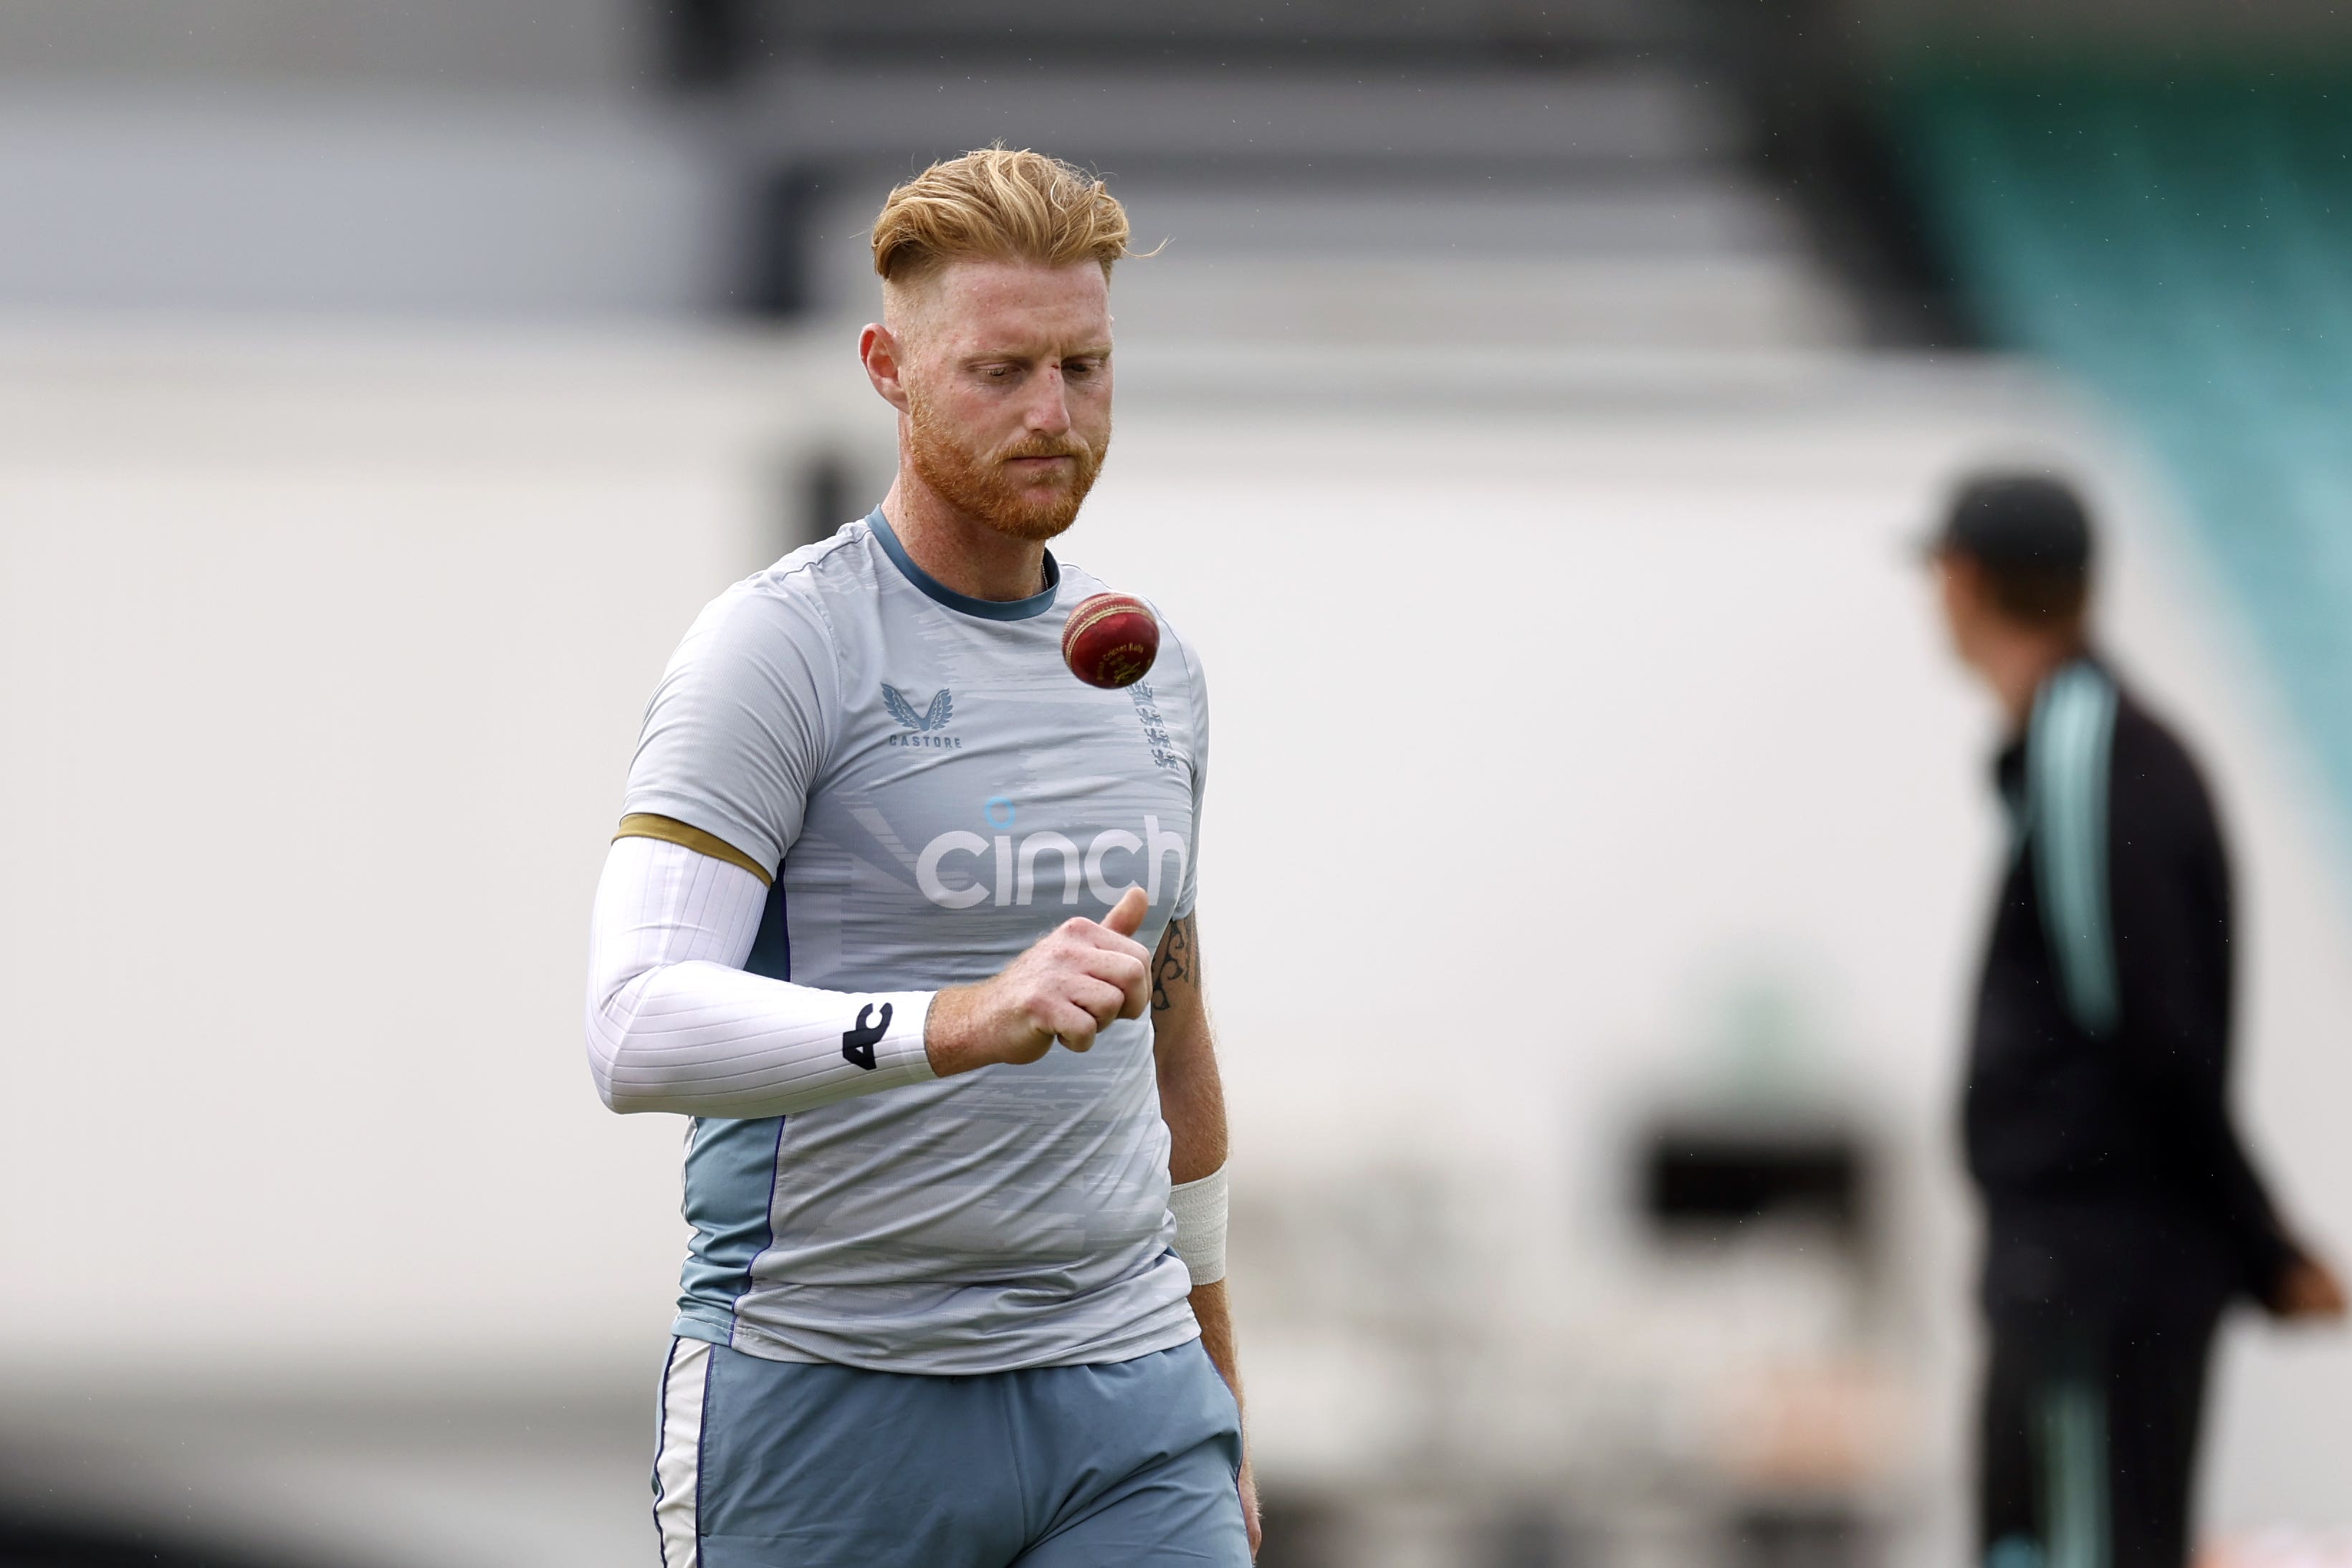 Ben Stokes is said to be struggling to bowl at full capacity (Steven Paston/PA)